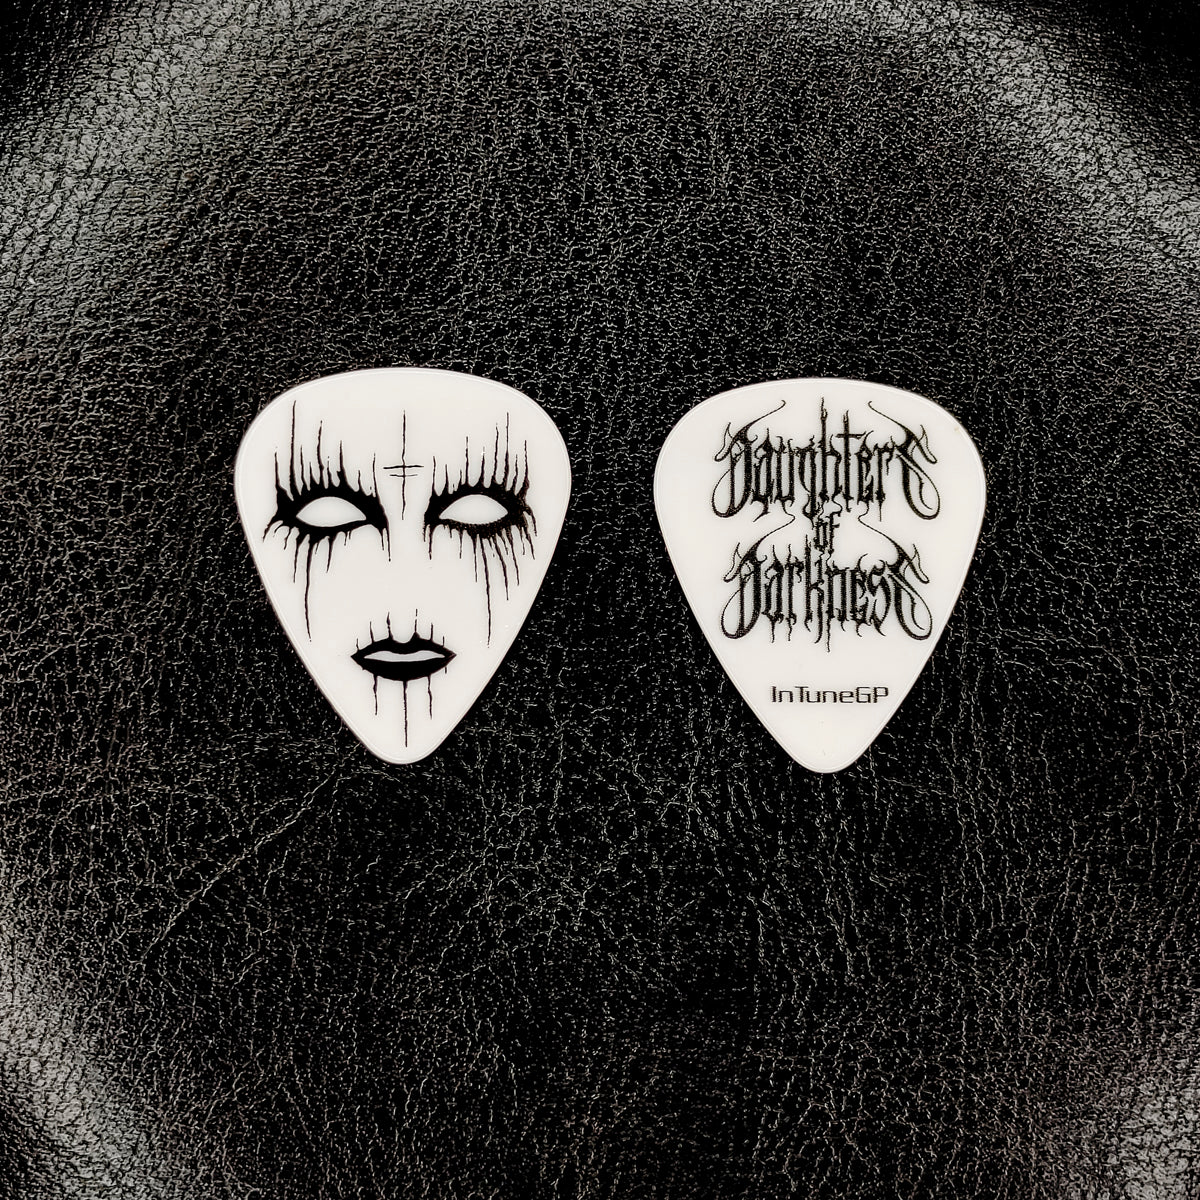 Daughters of Darkness - Leanansidthe 2 - Guitar Pick